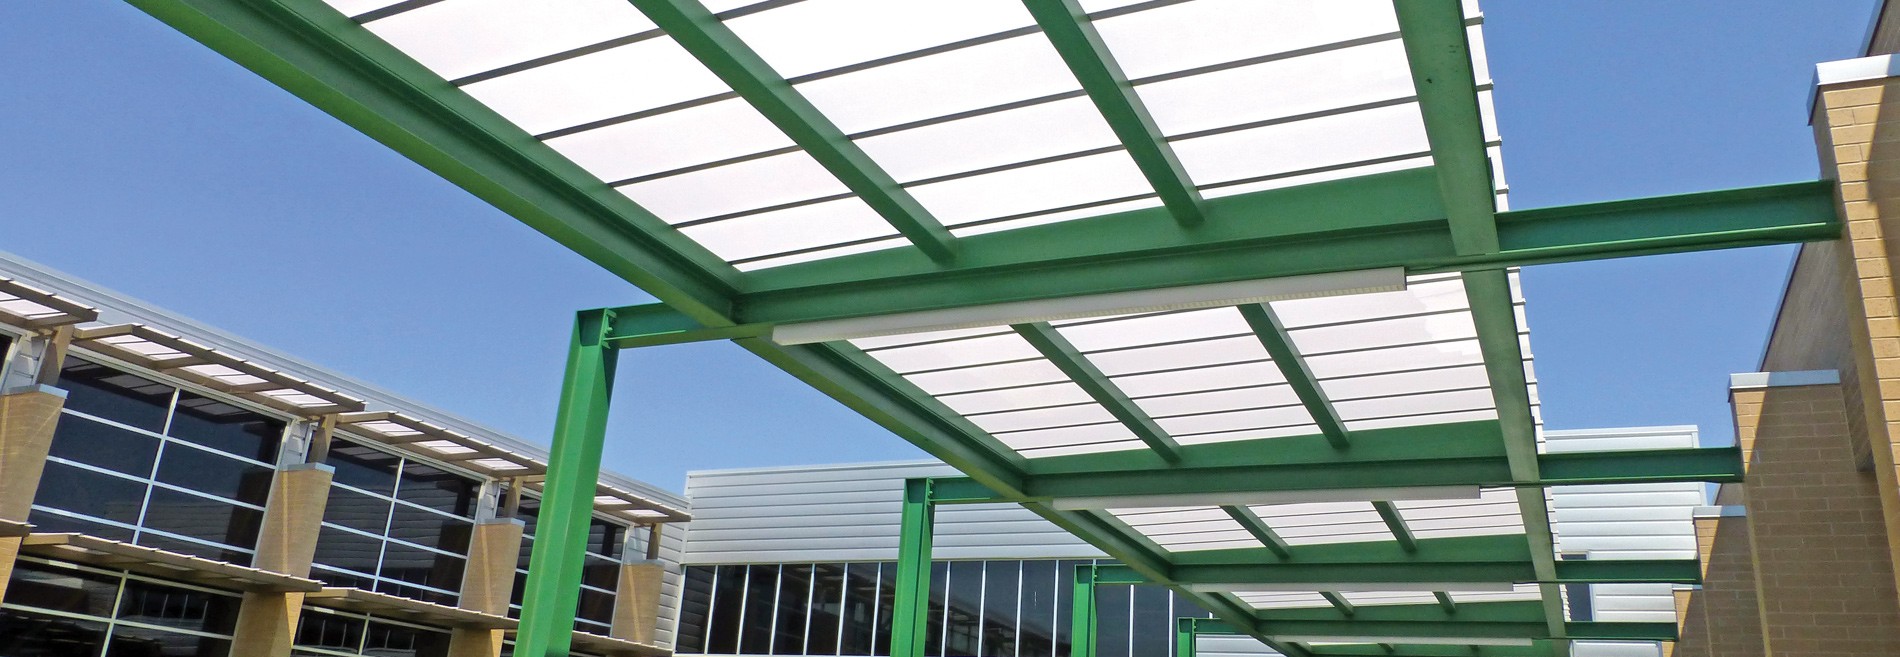 polycarbonate roofing system sunglaze being used for walkway